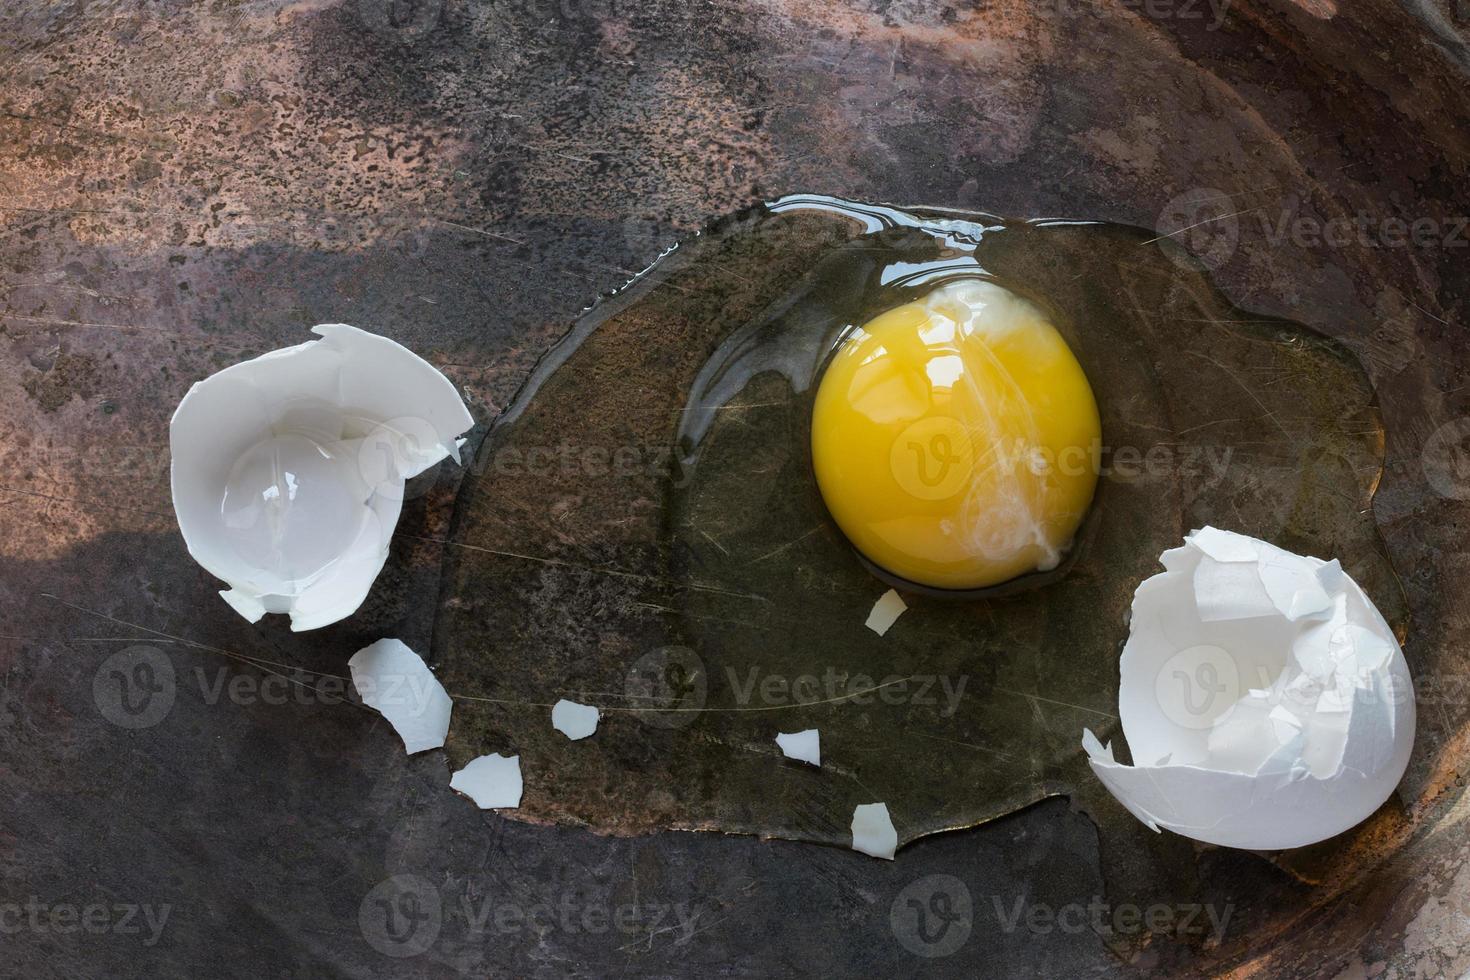 cracked white egg with whole yolk top view photo